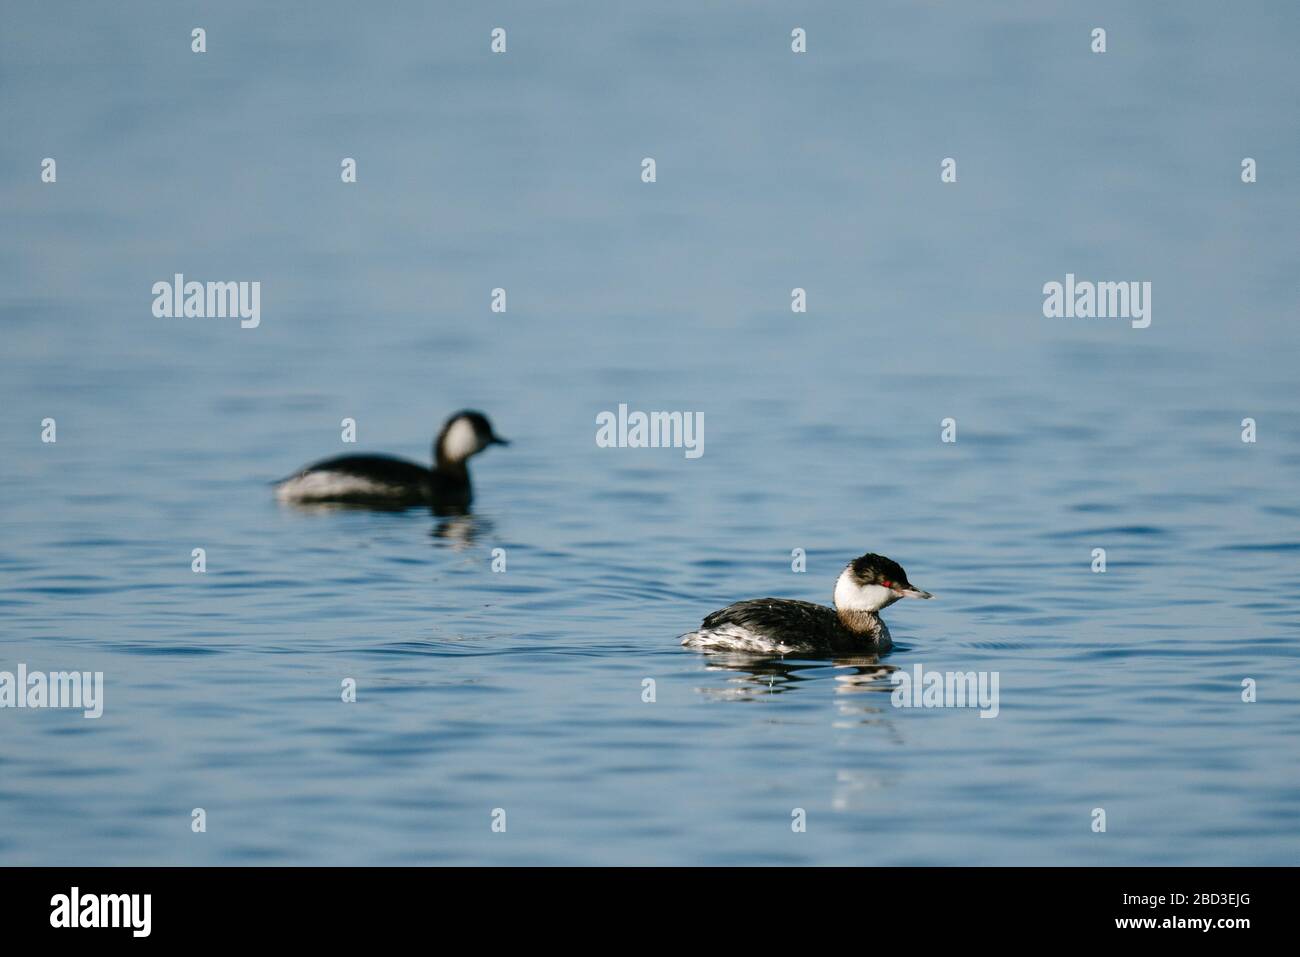 A pair of Horned Grebes swim on the blue waters of the Puget Sound Stock Photo